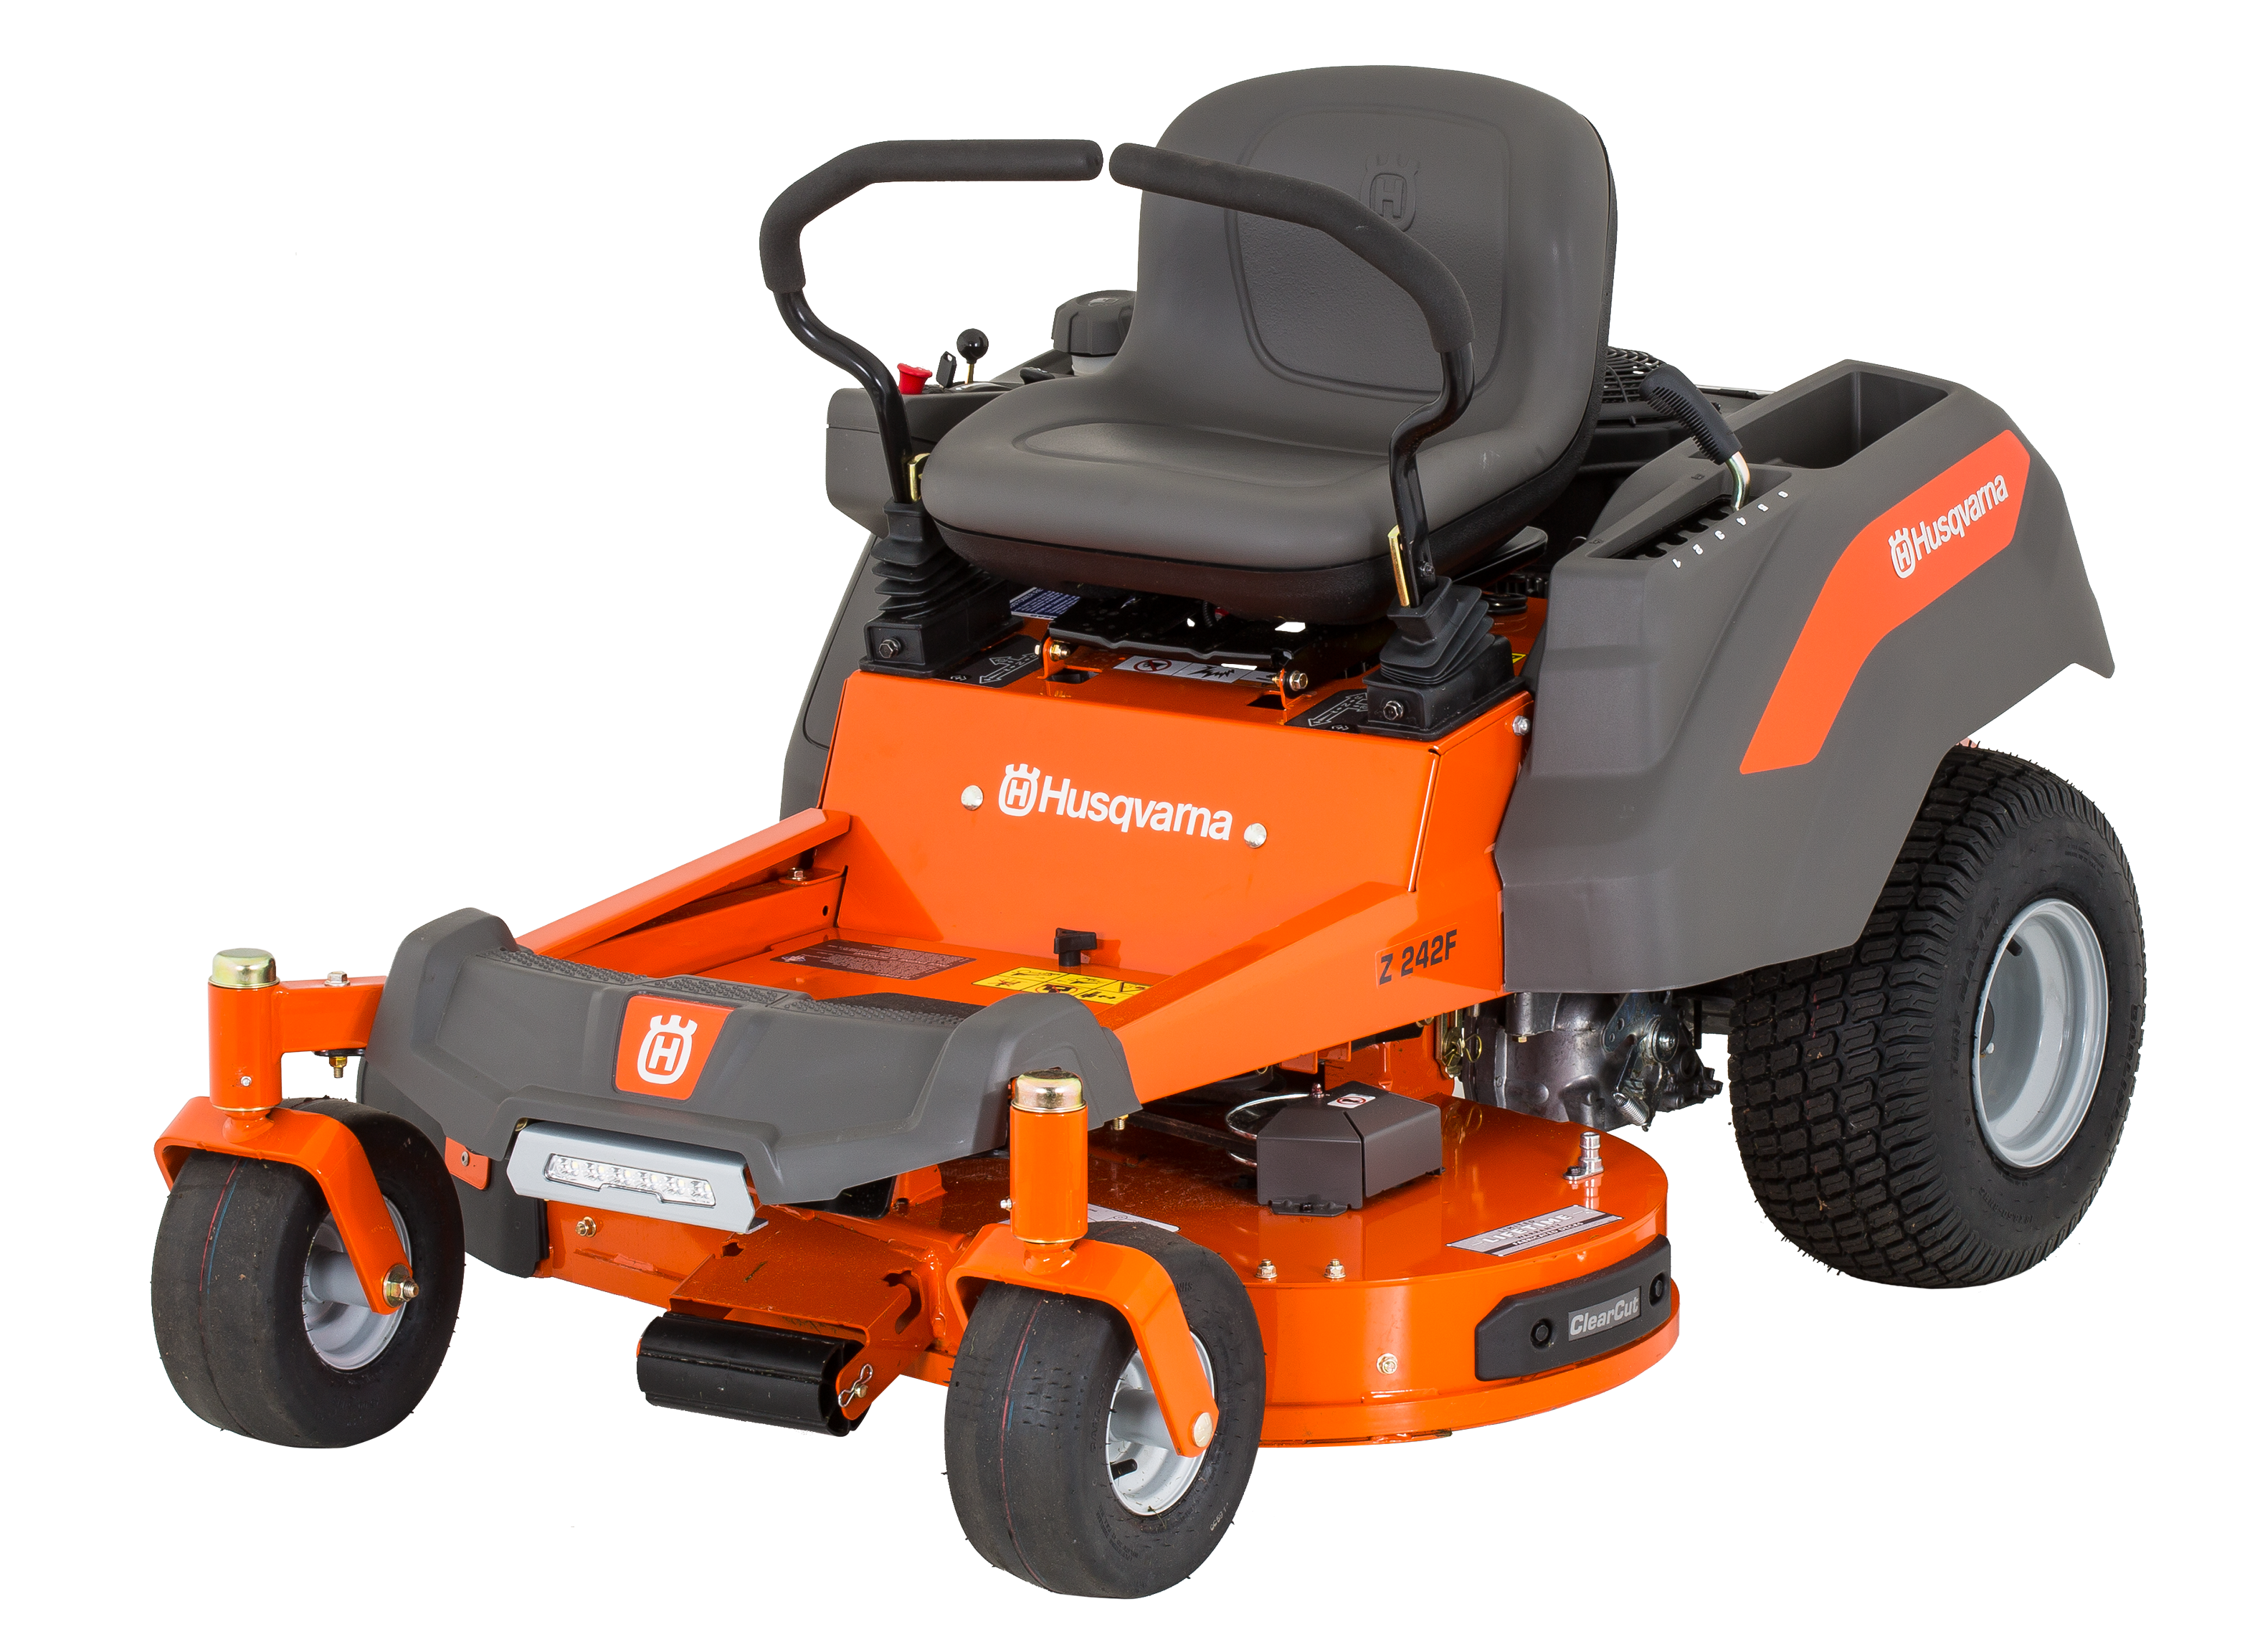 Husqvarna Z242F Lawn Mower & Tractor Review - Consumer Reports